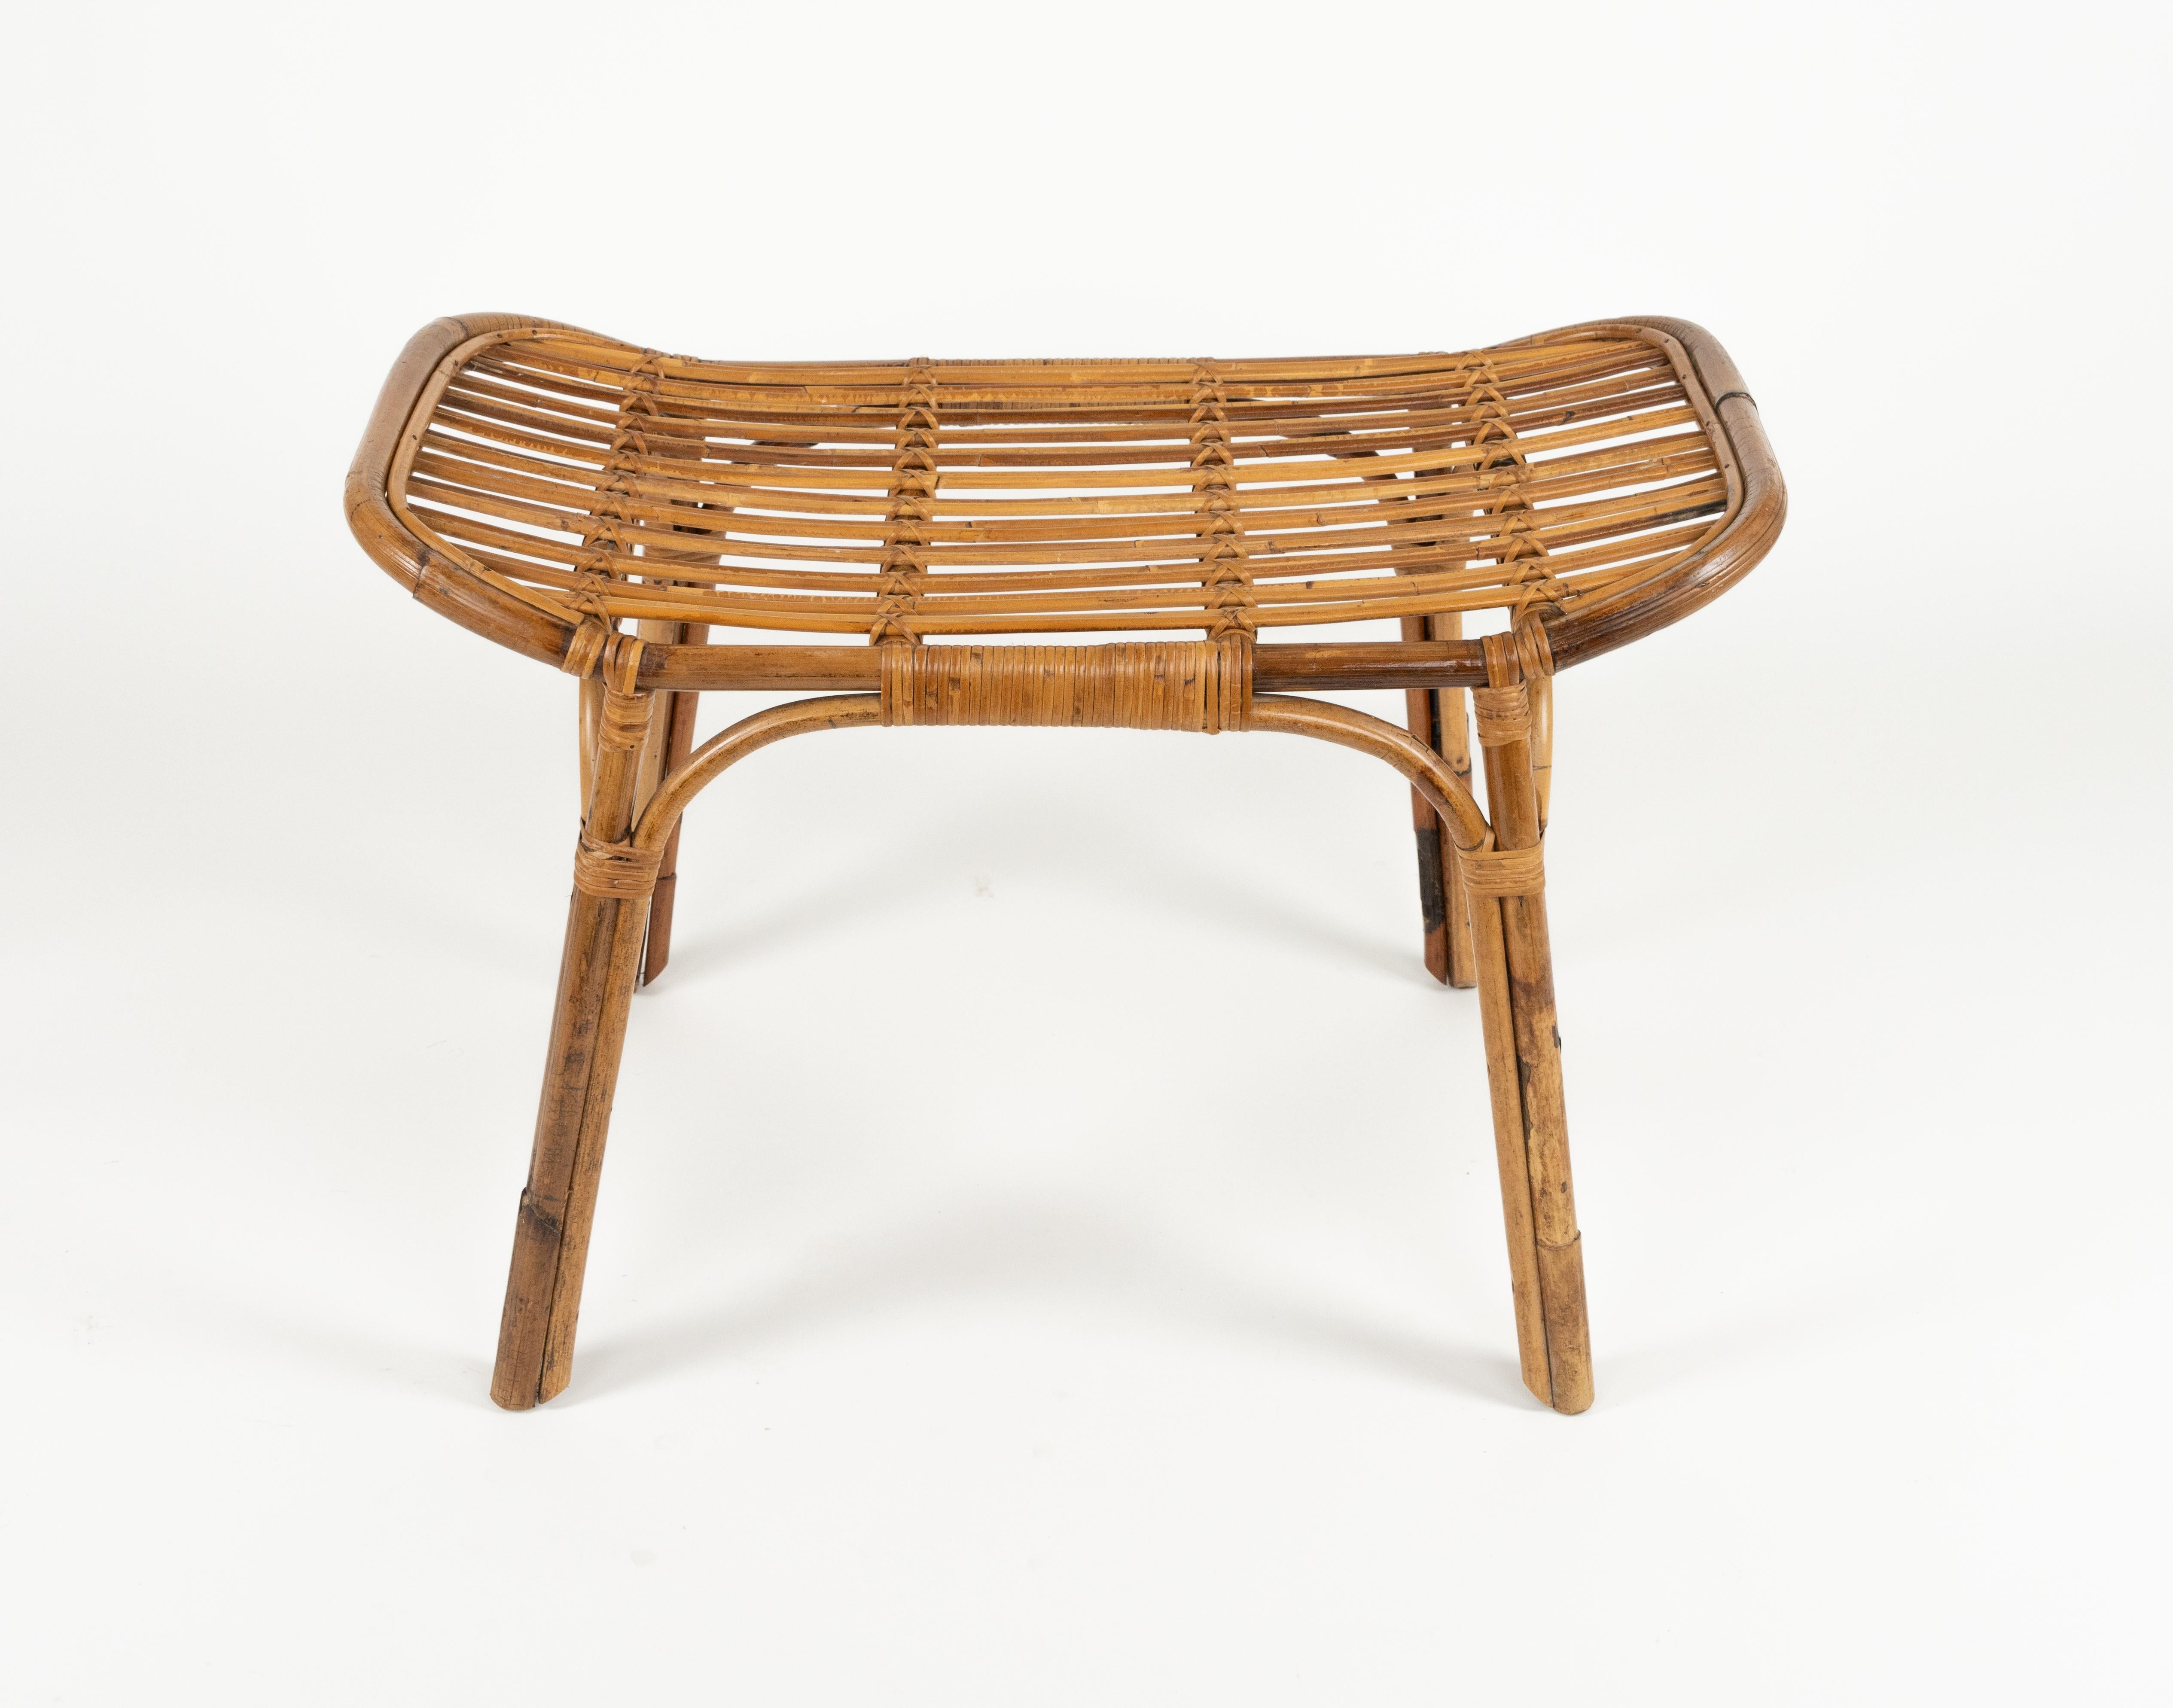 Midcentury beautiful bench or side table in rattan and bamboo in the style of Tito Agnoli.

Made in Italy in the 1960s.